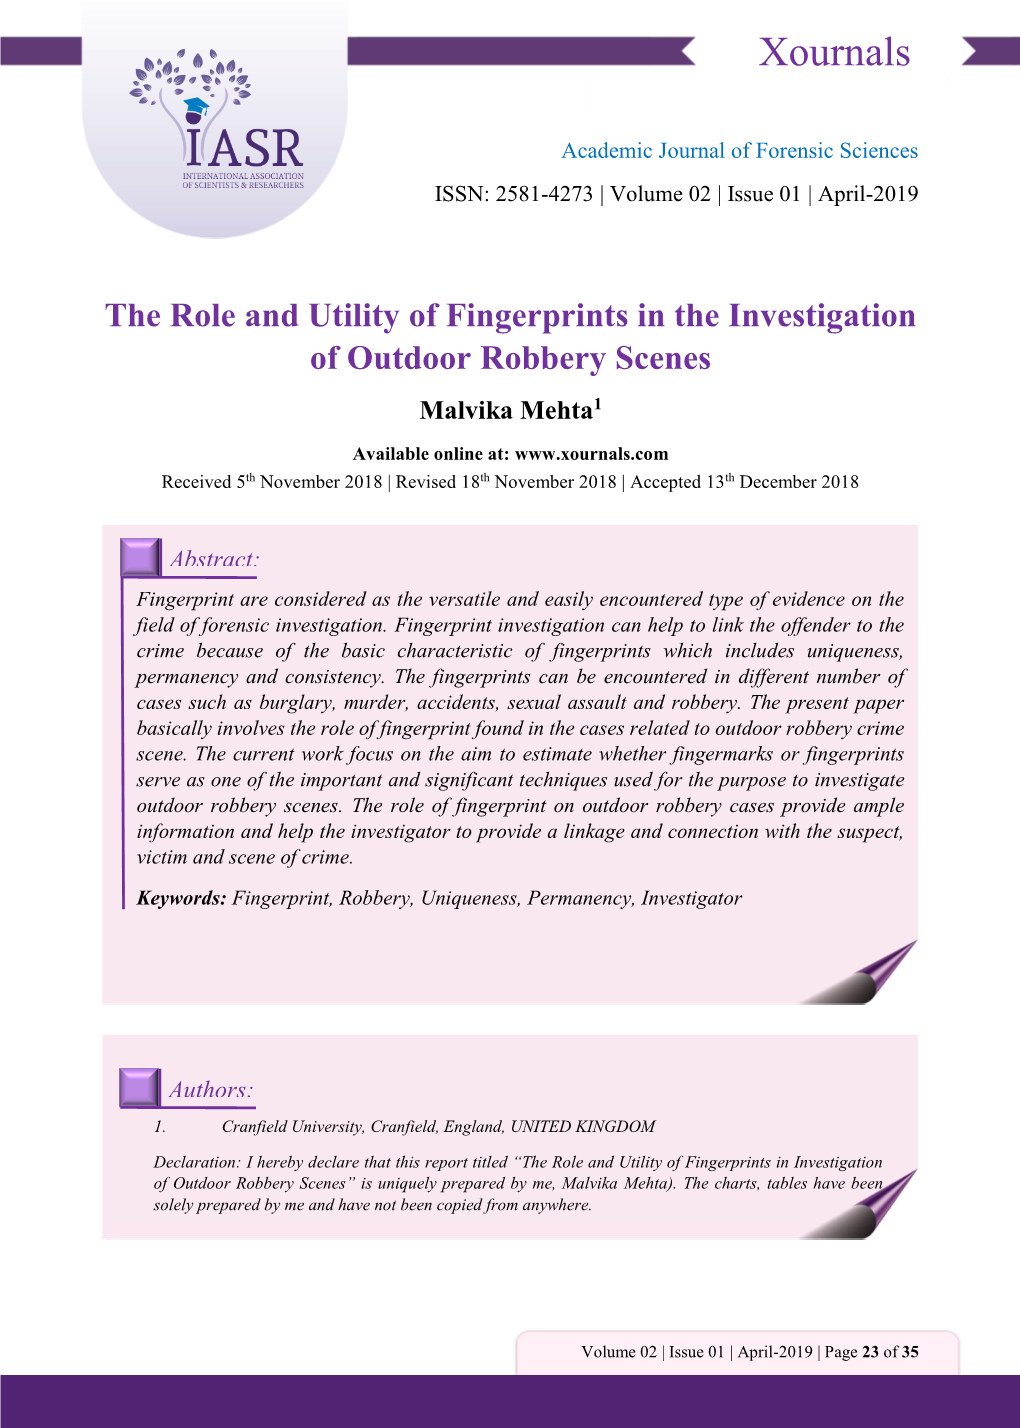 The Role and Utility of Fingerprints in the Investigation of Outdoor Robbery Scenes Malvika Mehta1